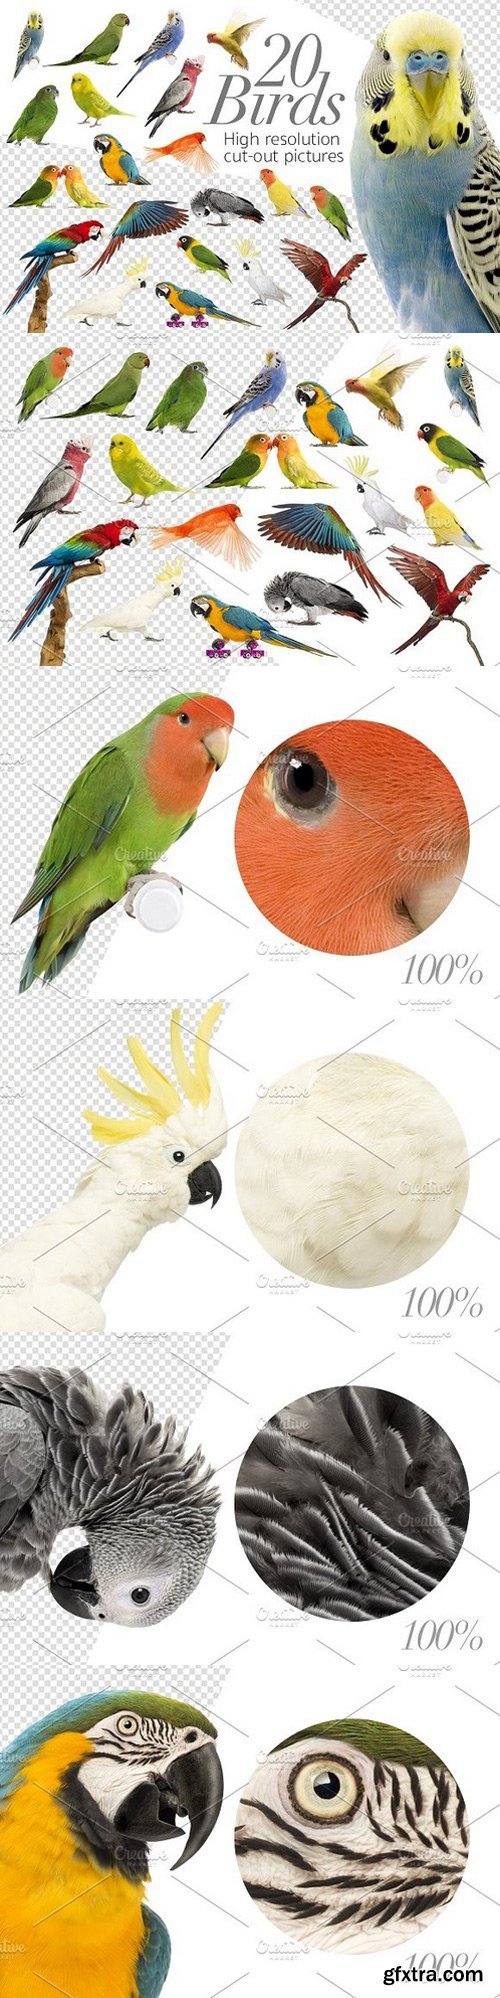 CM - 20 Birds - Cut-out High Res Pictures 1353076